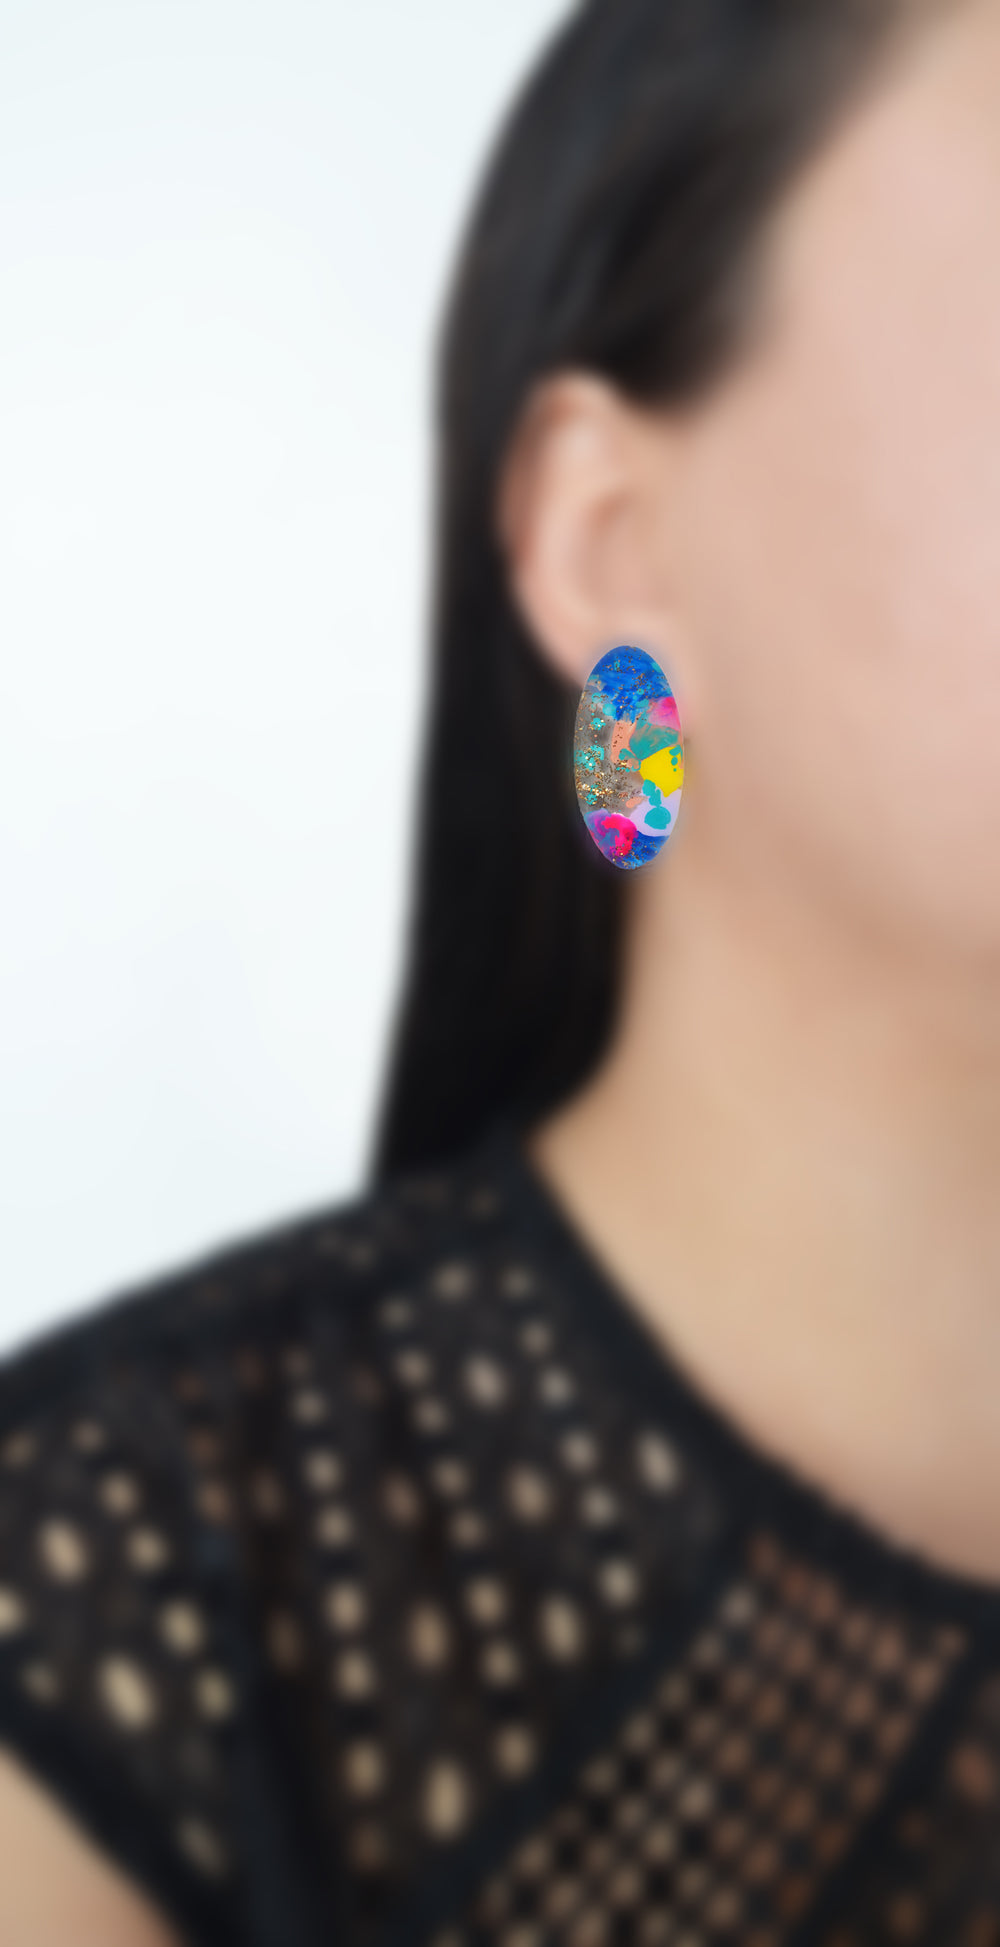 Blue and Gold Glitter Abstract Art Oval Resin Stud Earrings